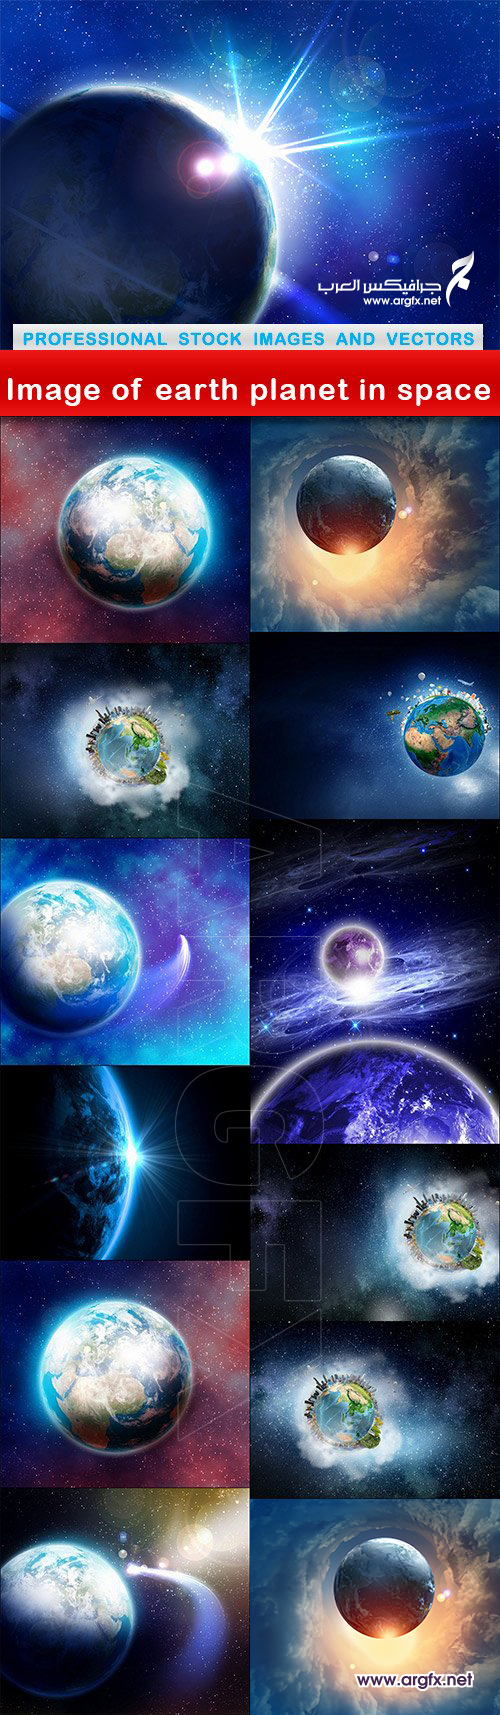  Image of earth planet in space - 13 UHQ JPEG